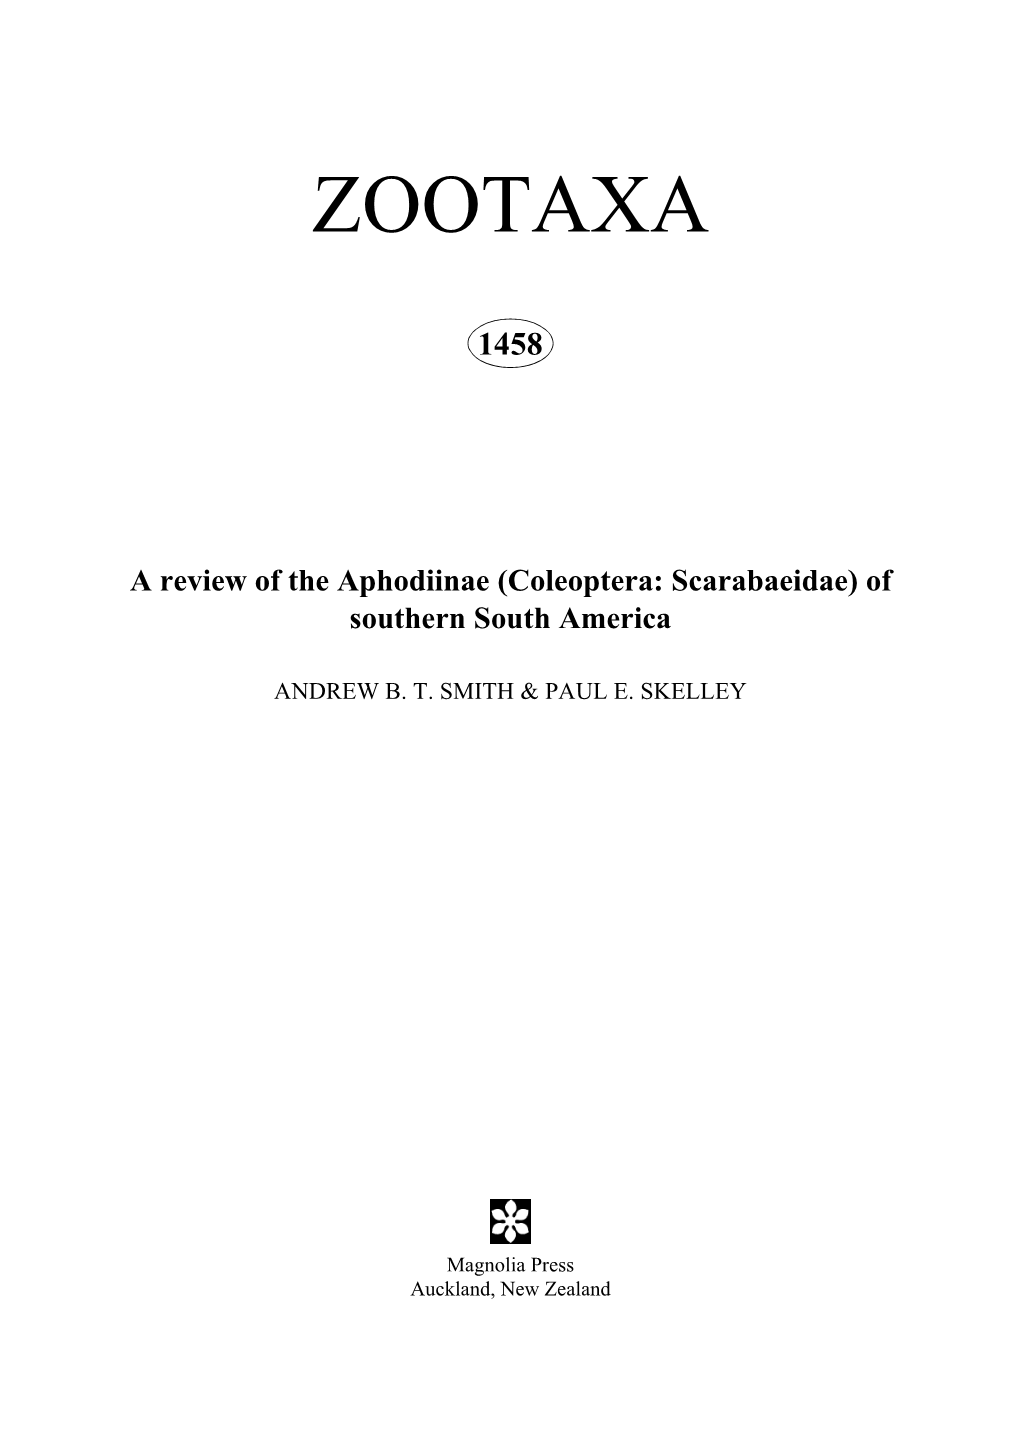 Zootaxa,A Review of the Aphodiinae (Coleoptera